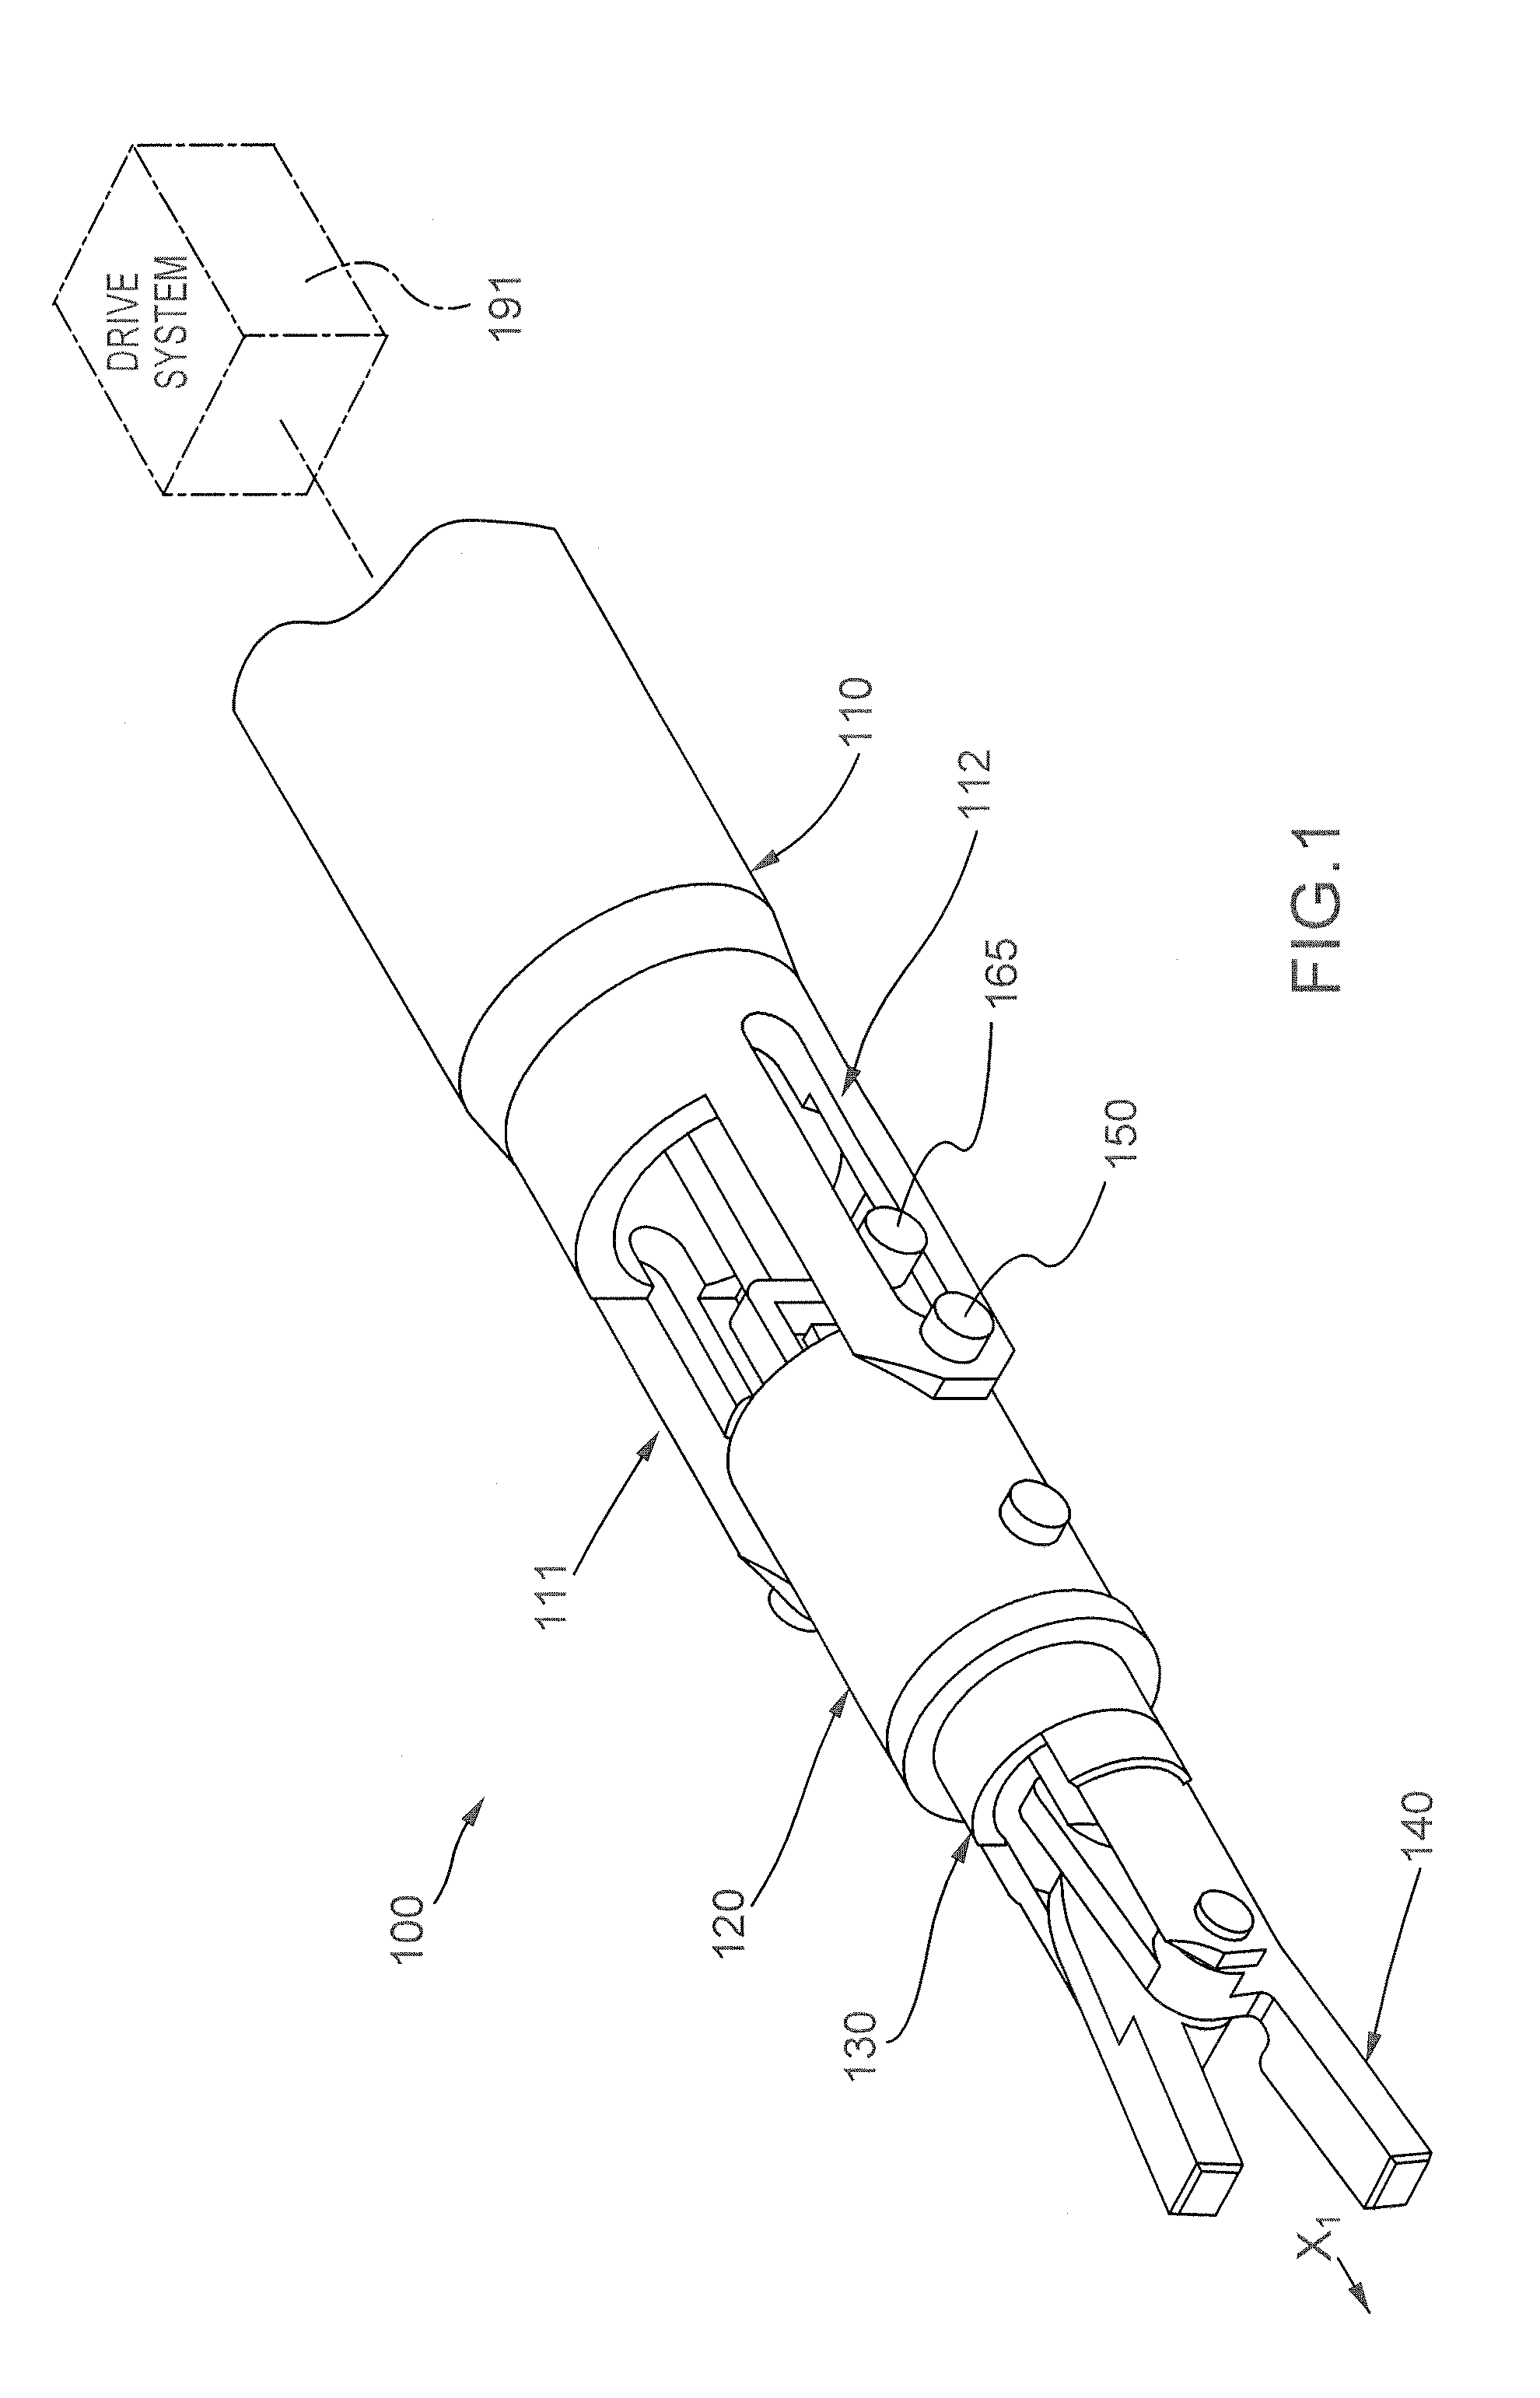 Flexible wrist-type element and methods of manufacture and use thereof